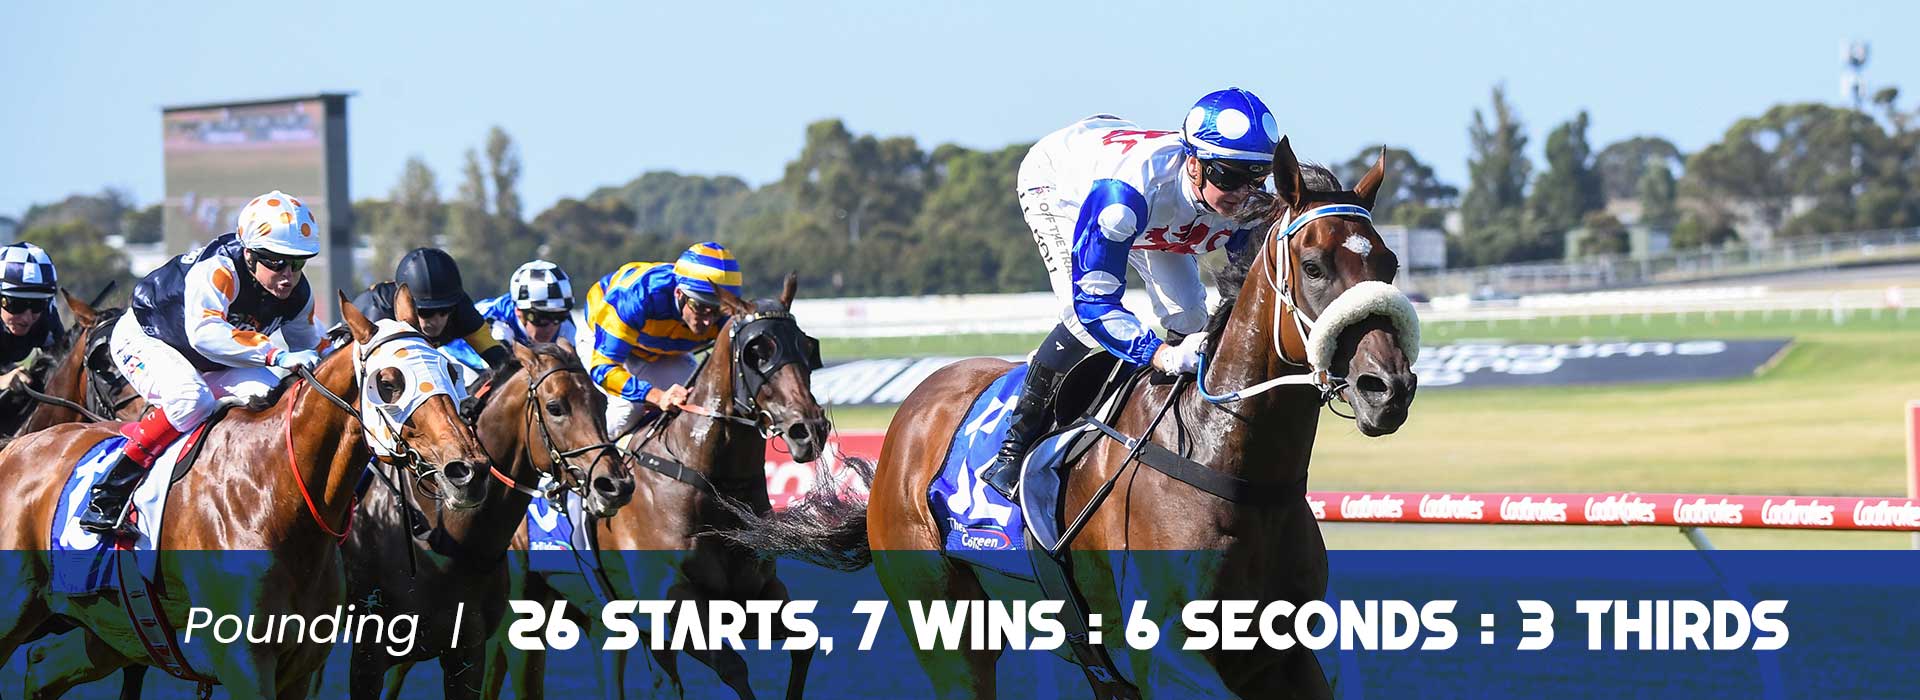 Pounding / 26 Starts-7:6:3. Prizemoney: $982,290. Group 3 Winner. 3rd in Group 1 Australia Cup.